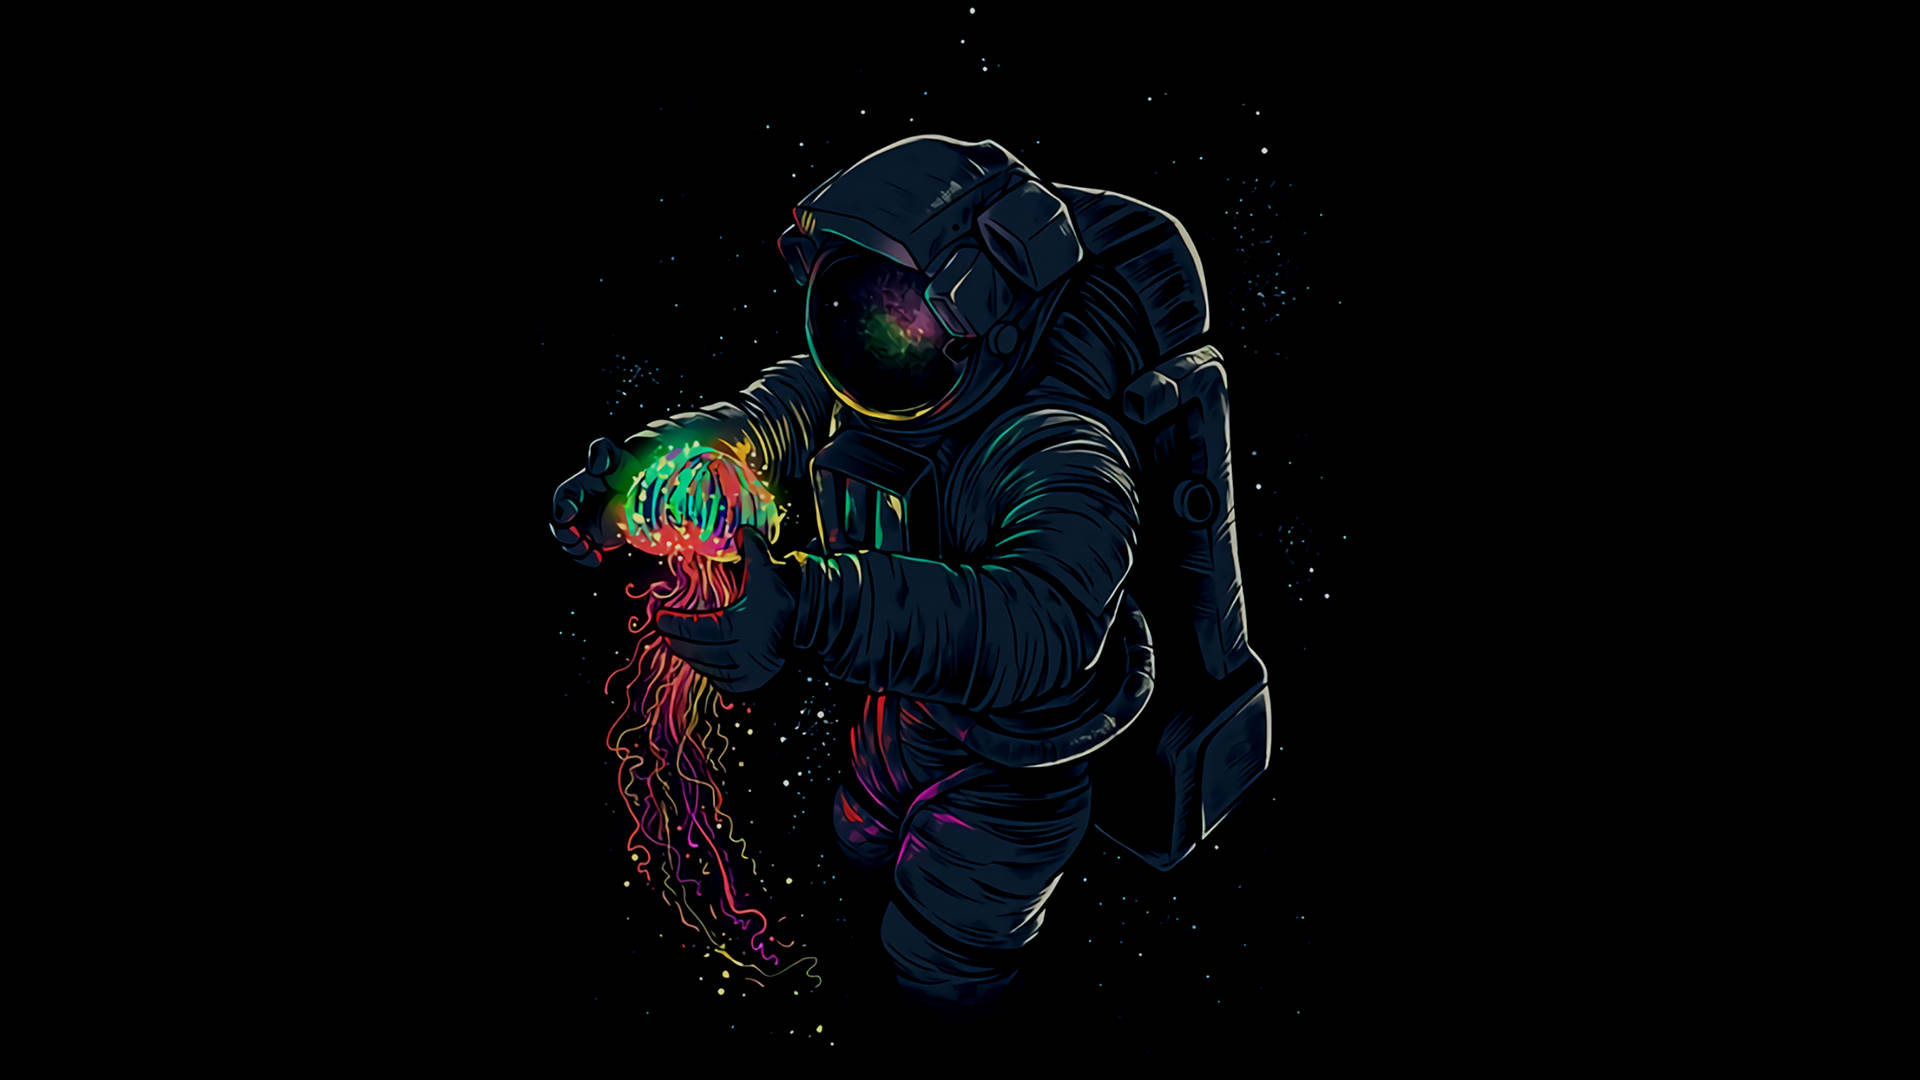 Astronaut Aesthetic With Neon Jellyfish Wallpaper